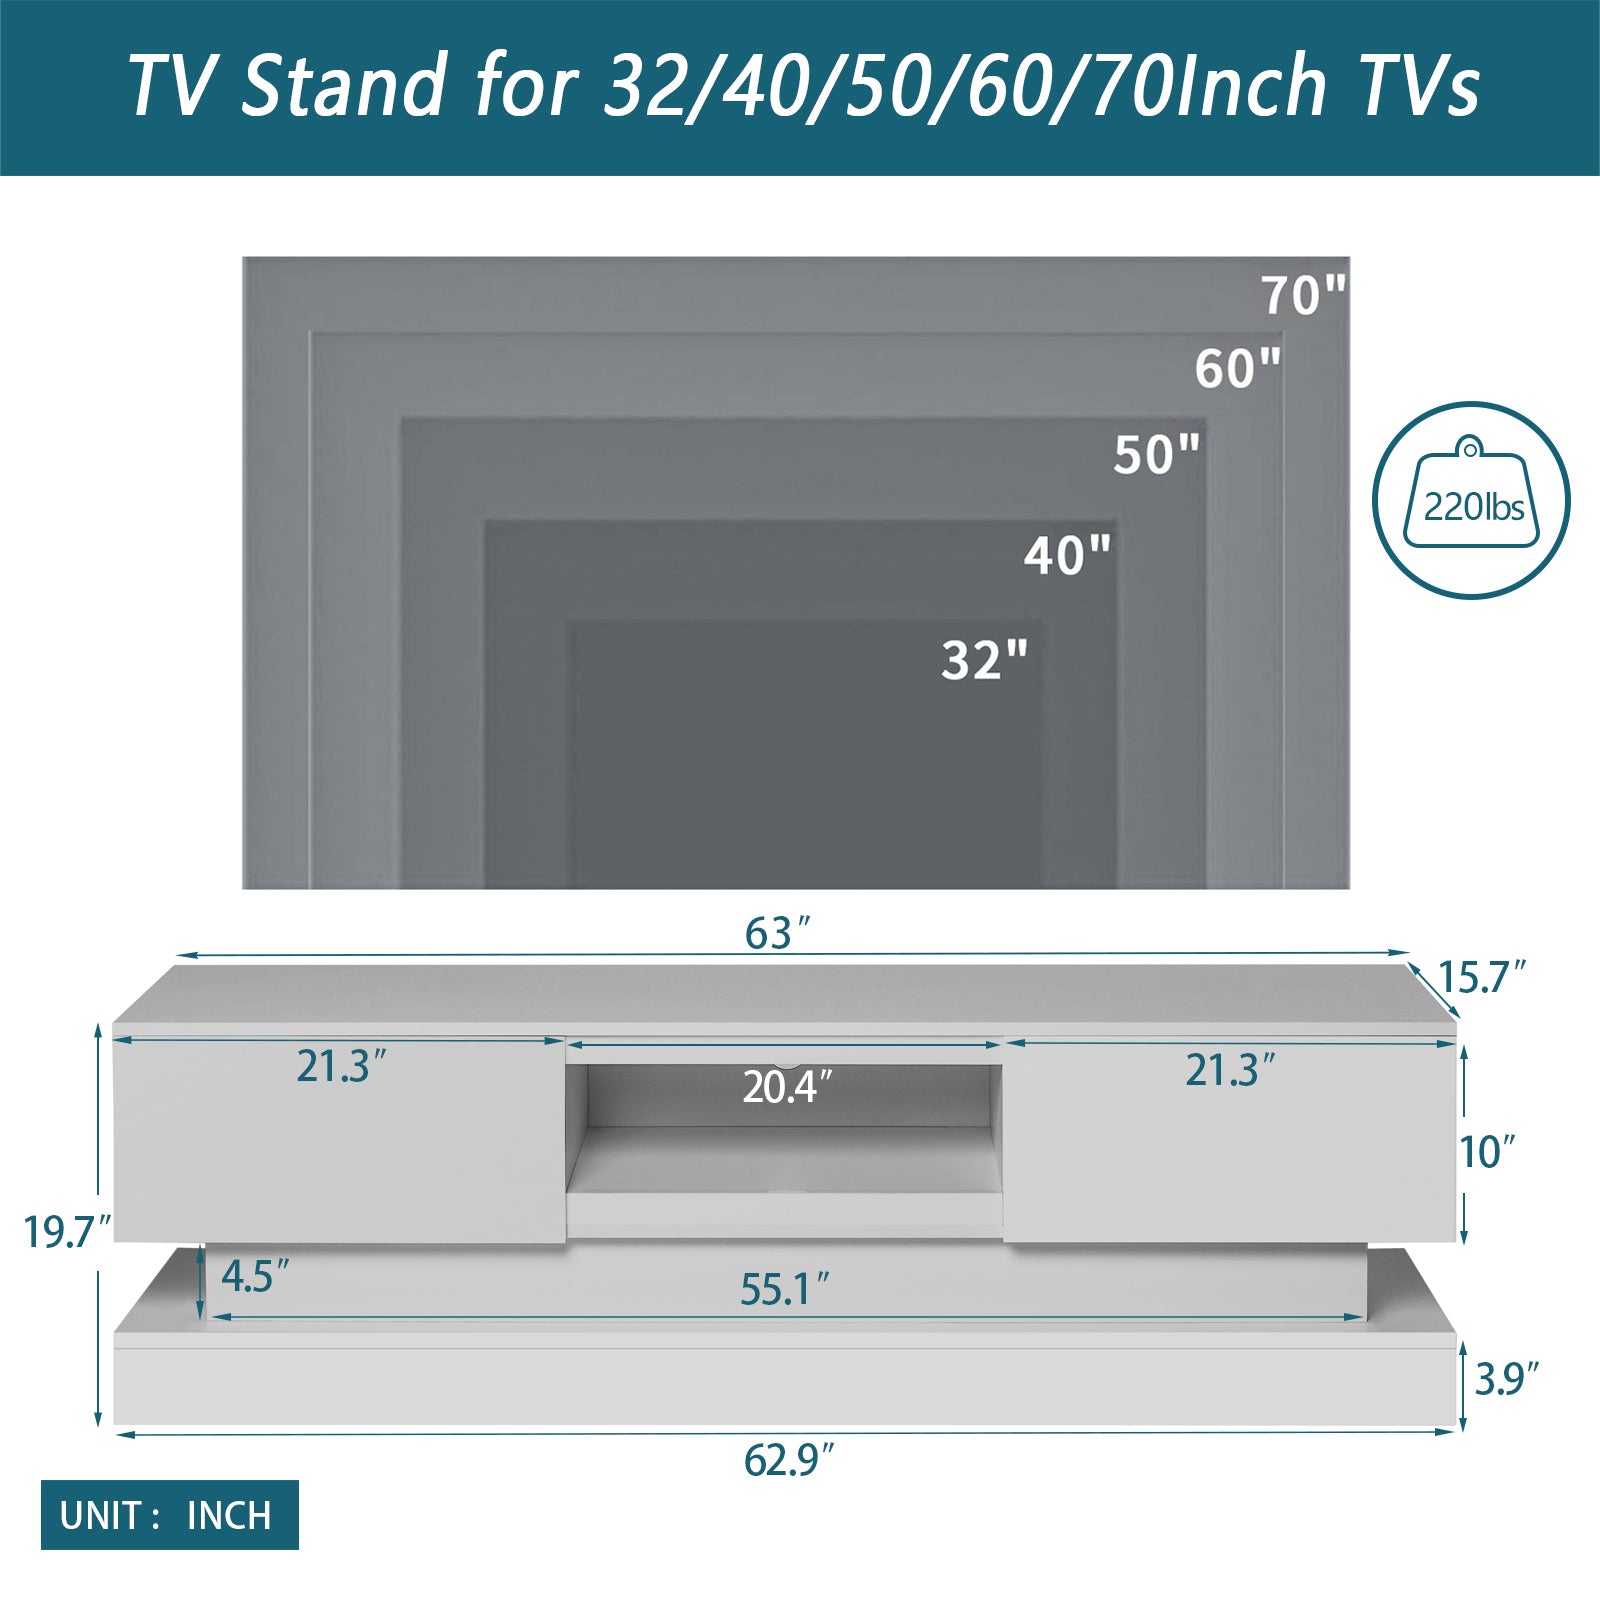 1.3M Modern TV Stand with LED Light (White)